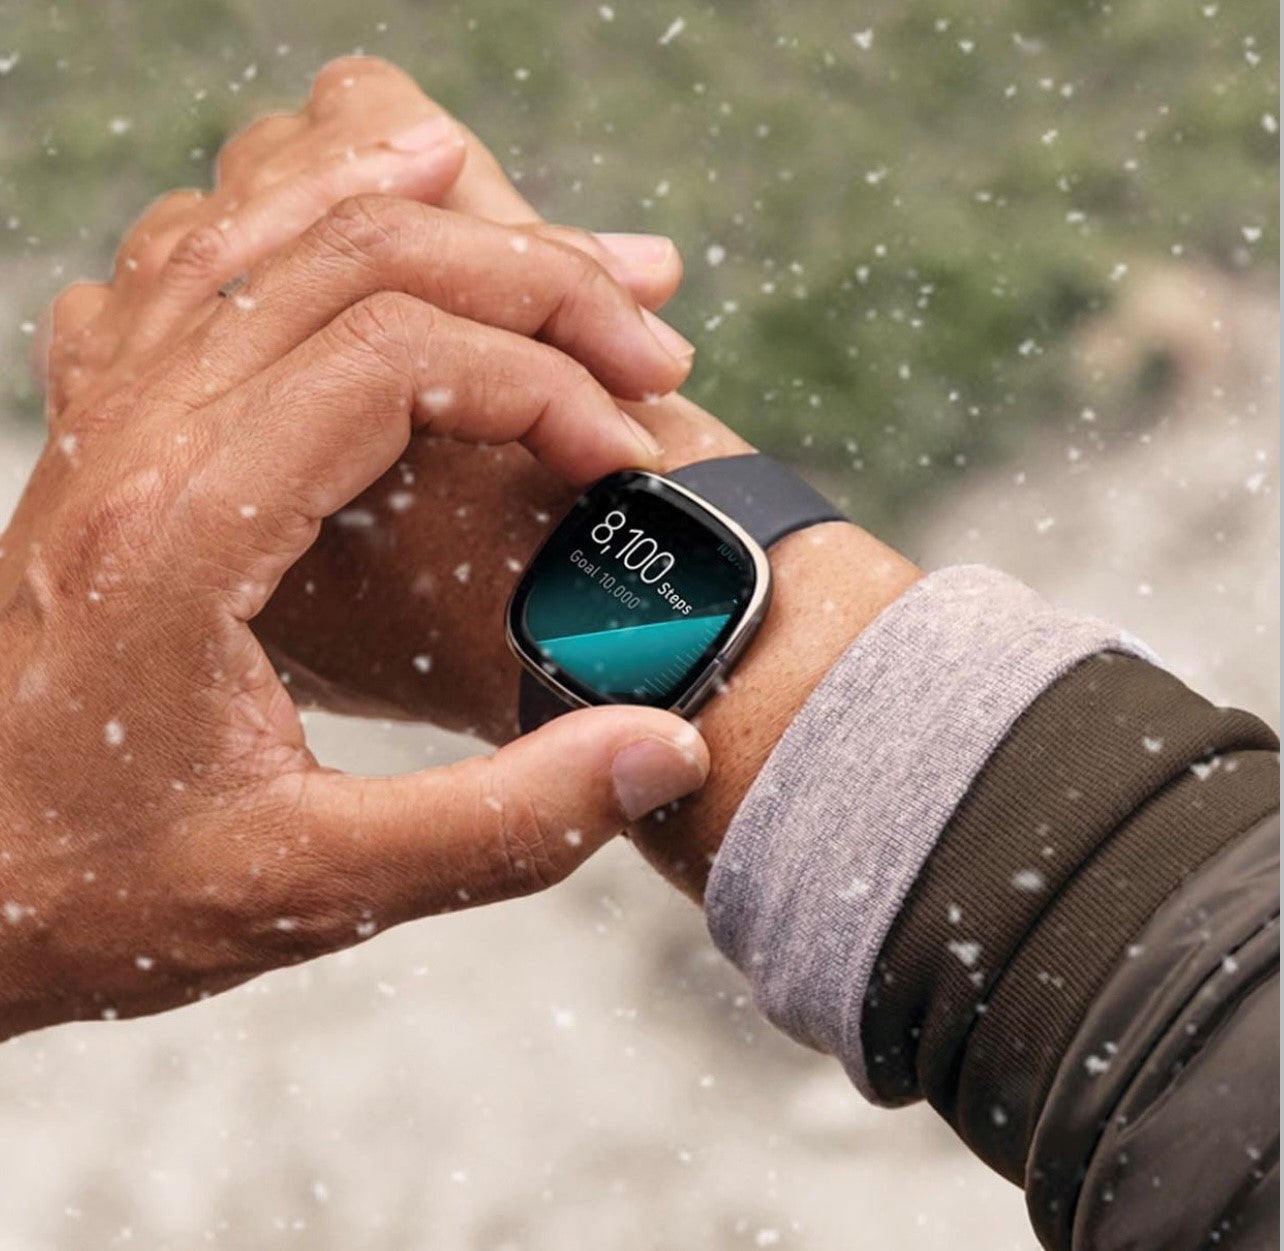 FitBit smart watch from The Source